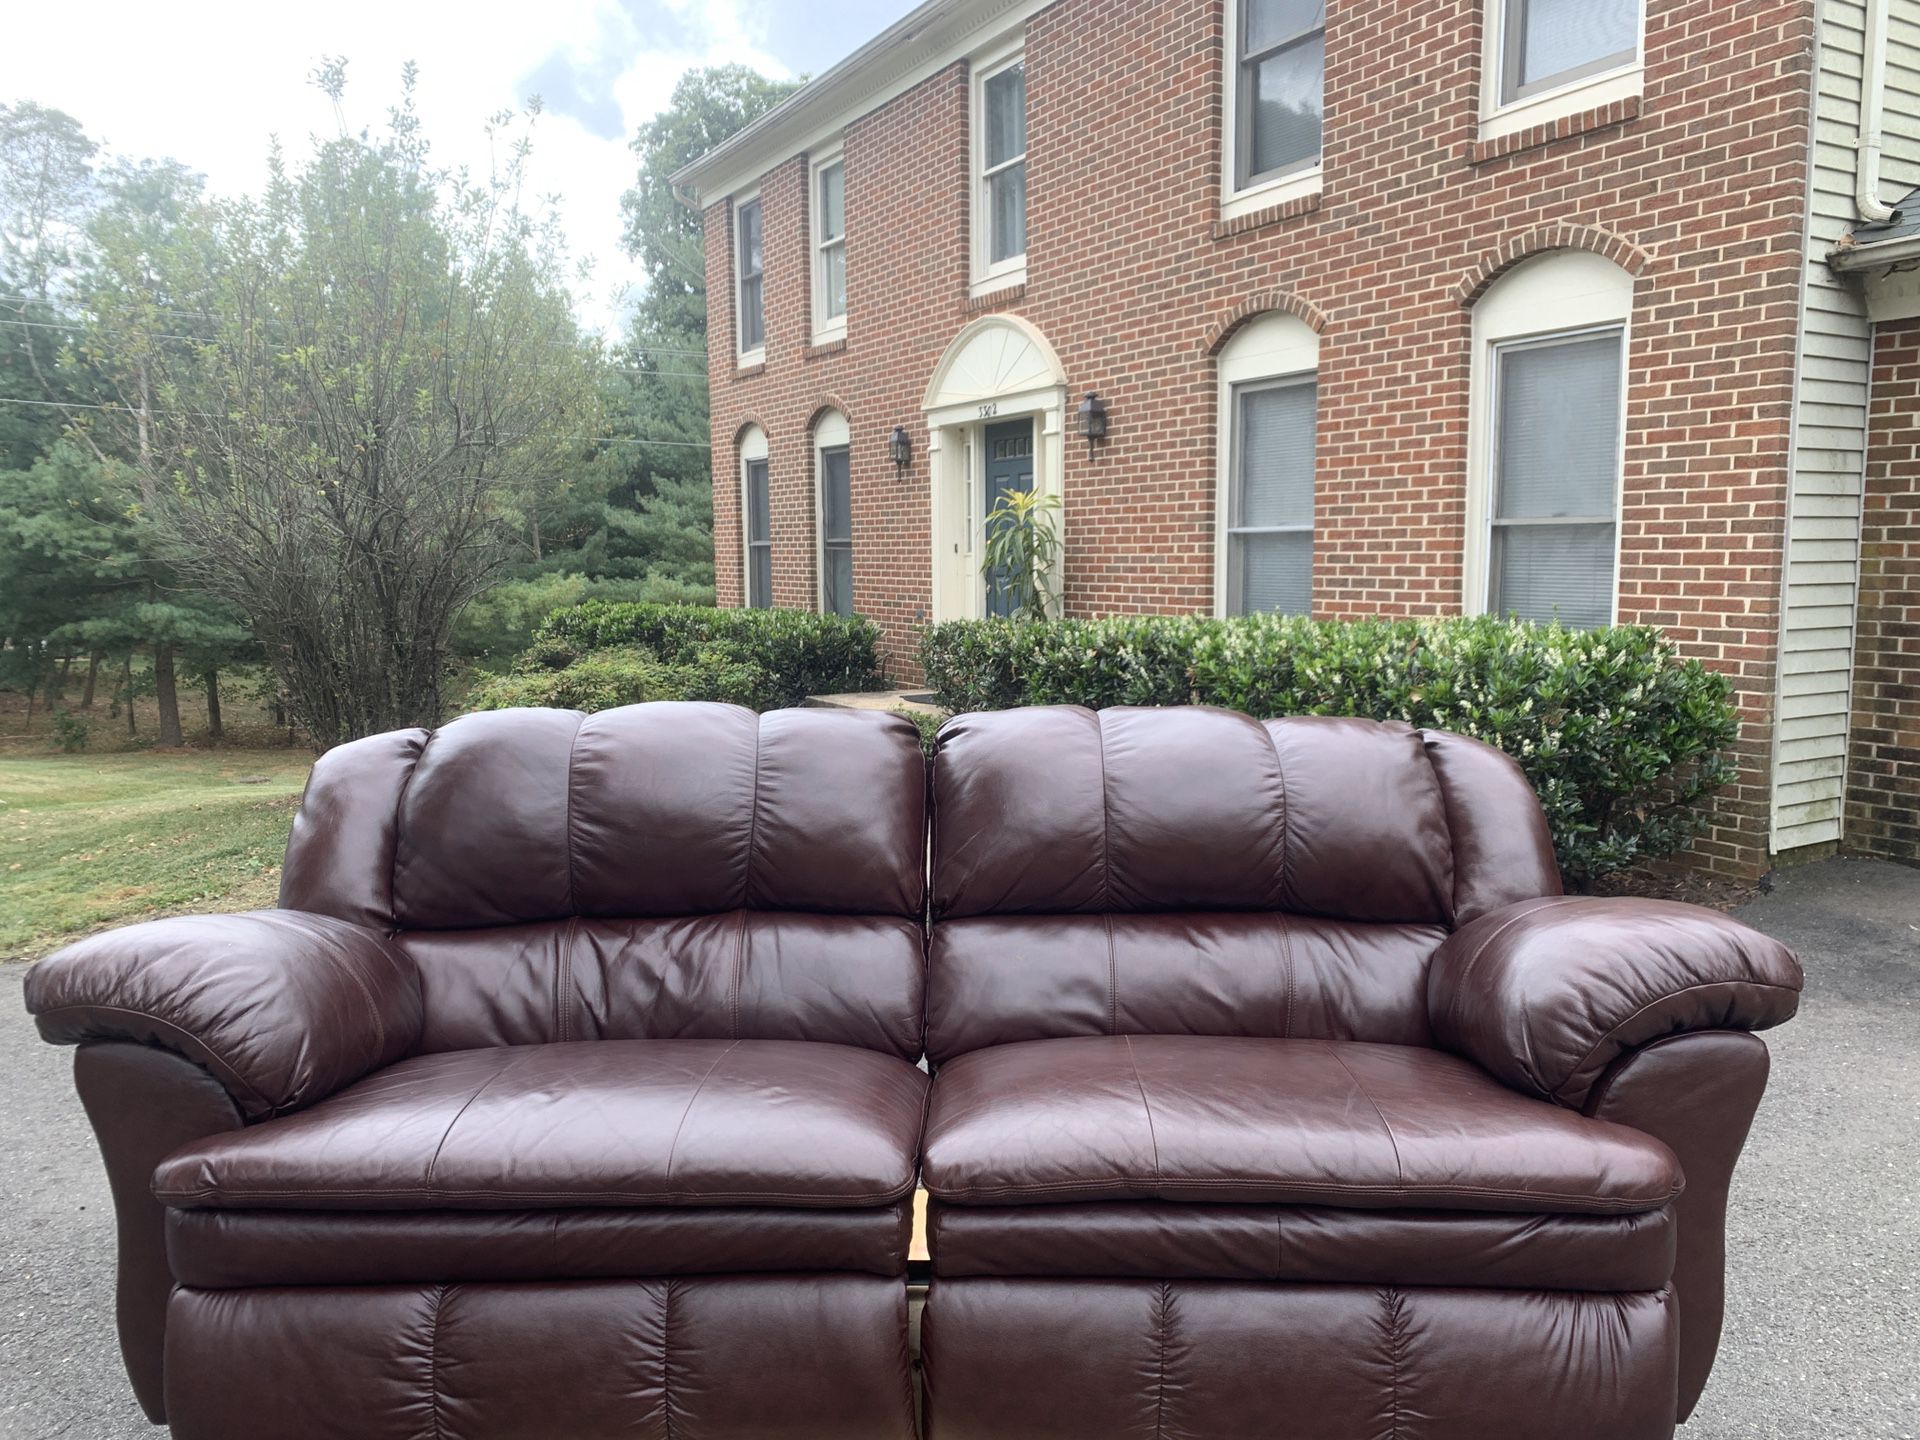 Two leather couches